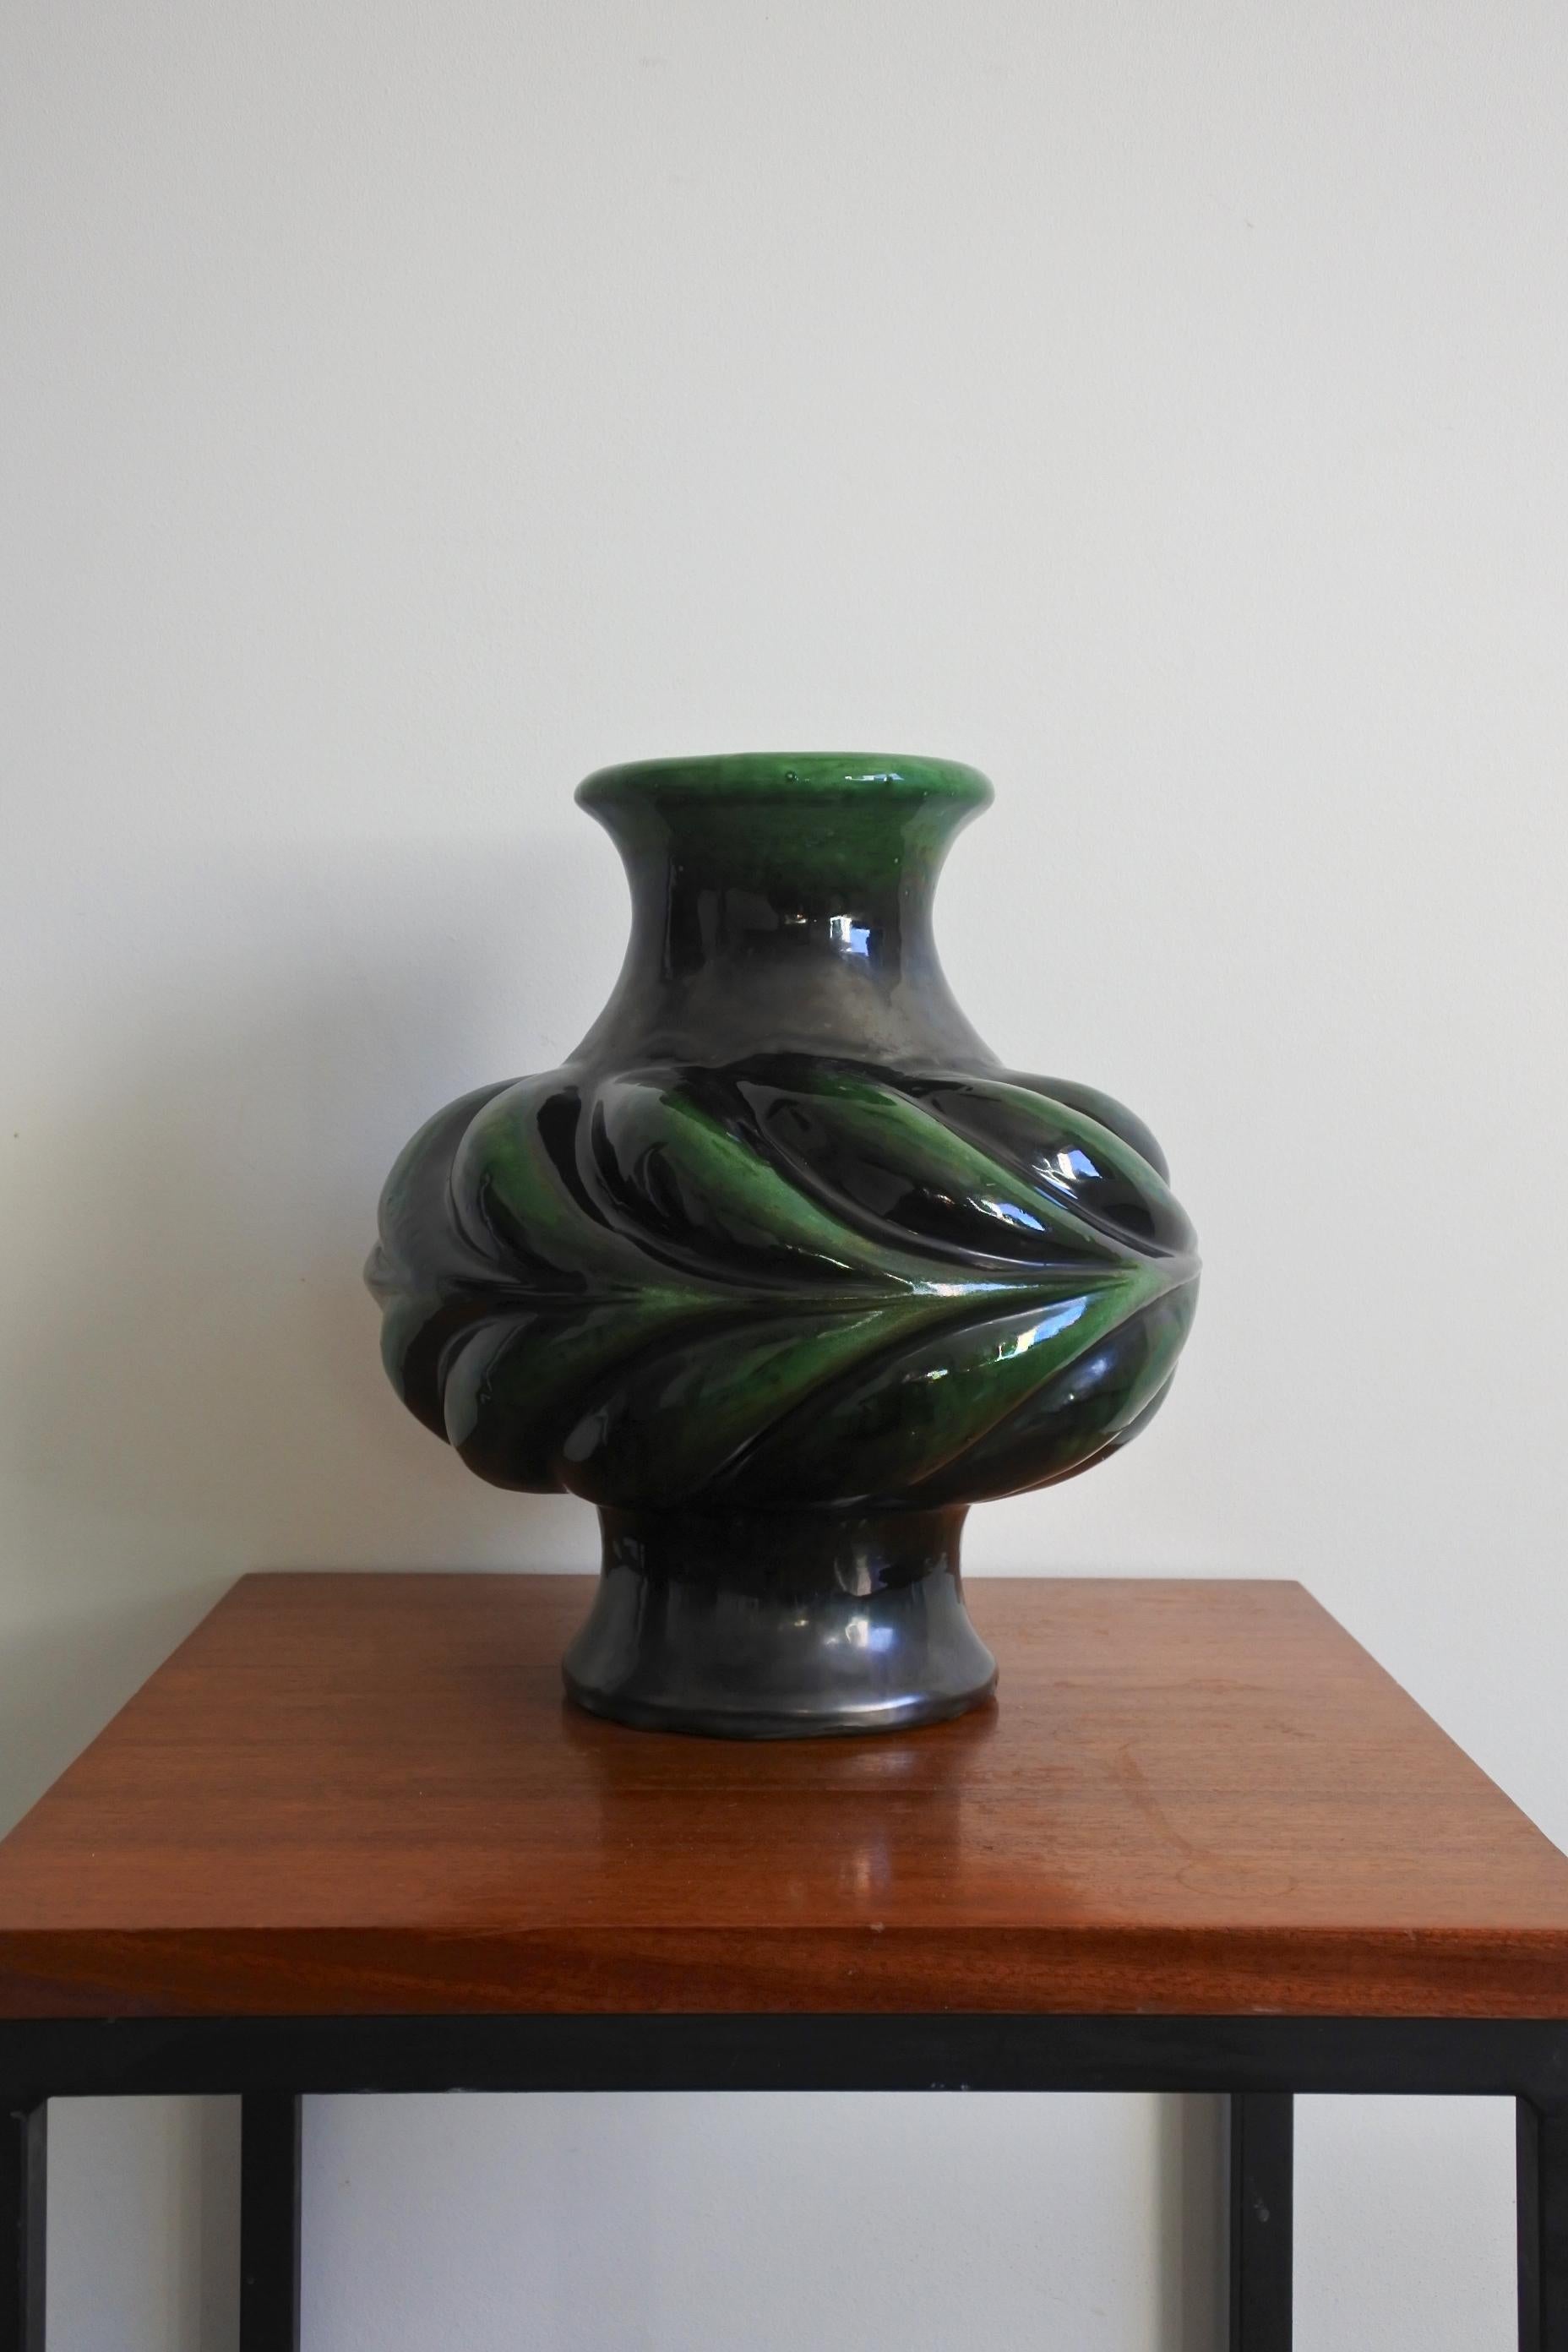 Scarce glazed ceramic vase by renowned french pottery artist Pol Chambost.
Model 816, black, green and white glaze.
Made in France in the 1954.
Only 8 exemplars from 1954 to 1957.
Literature: 